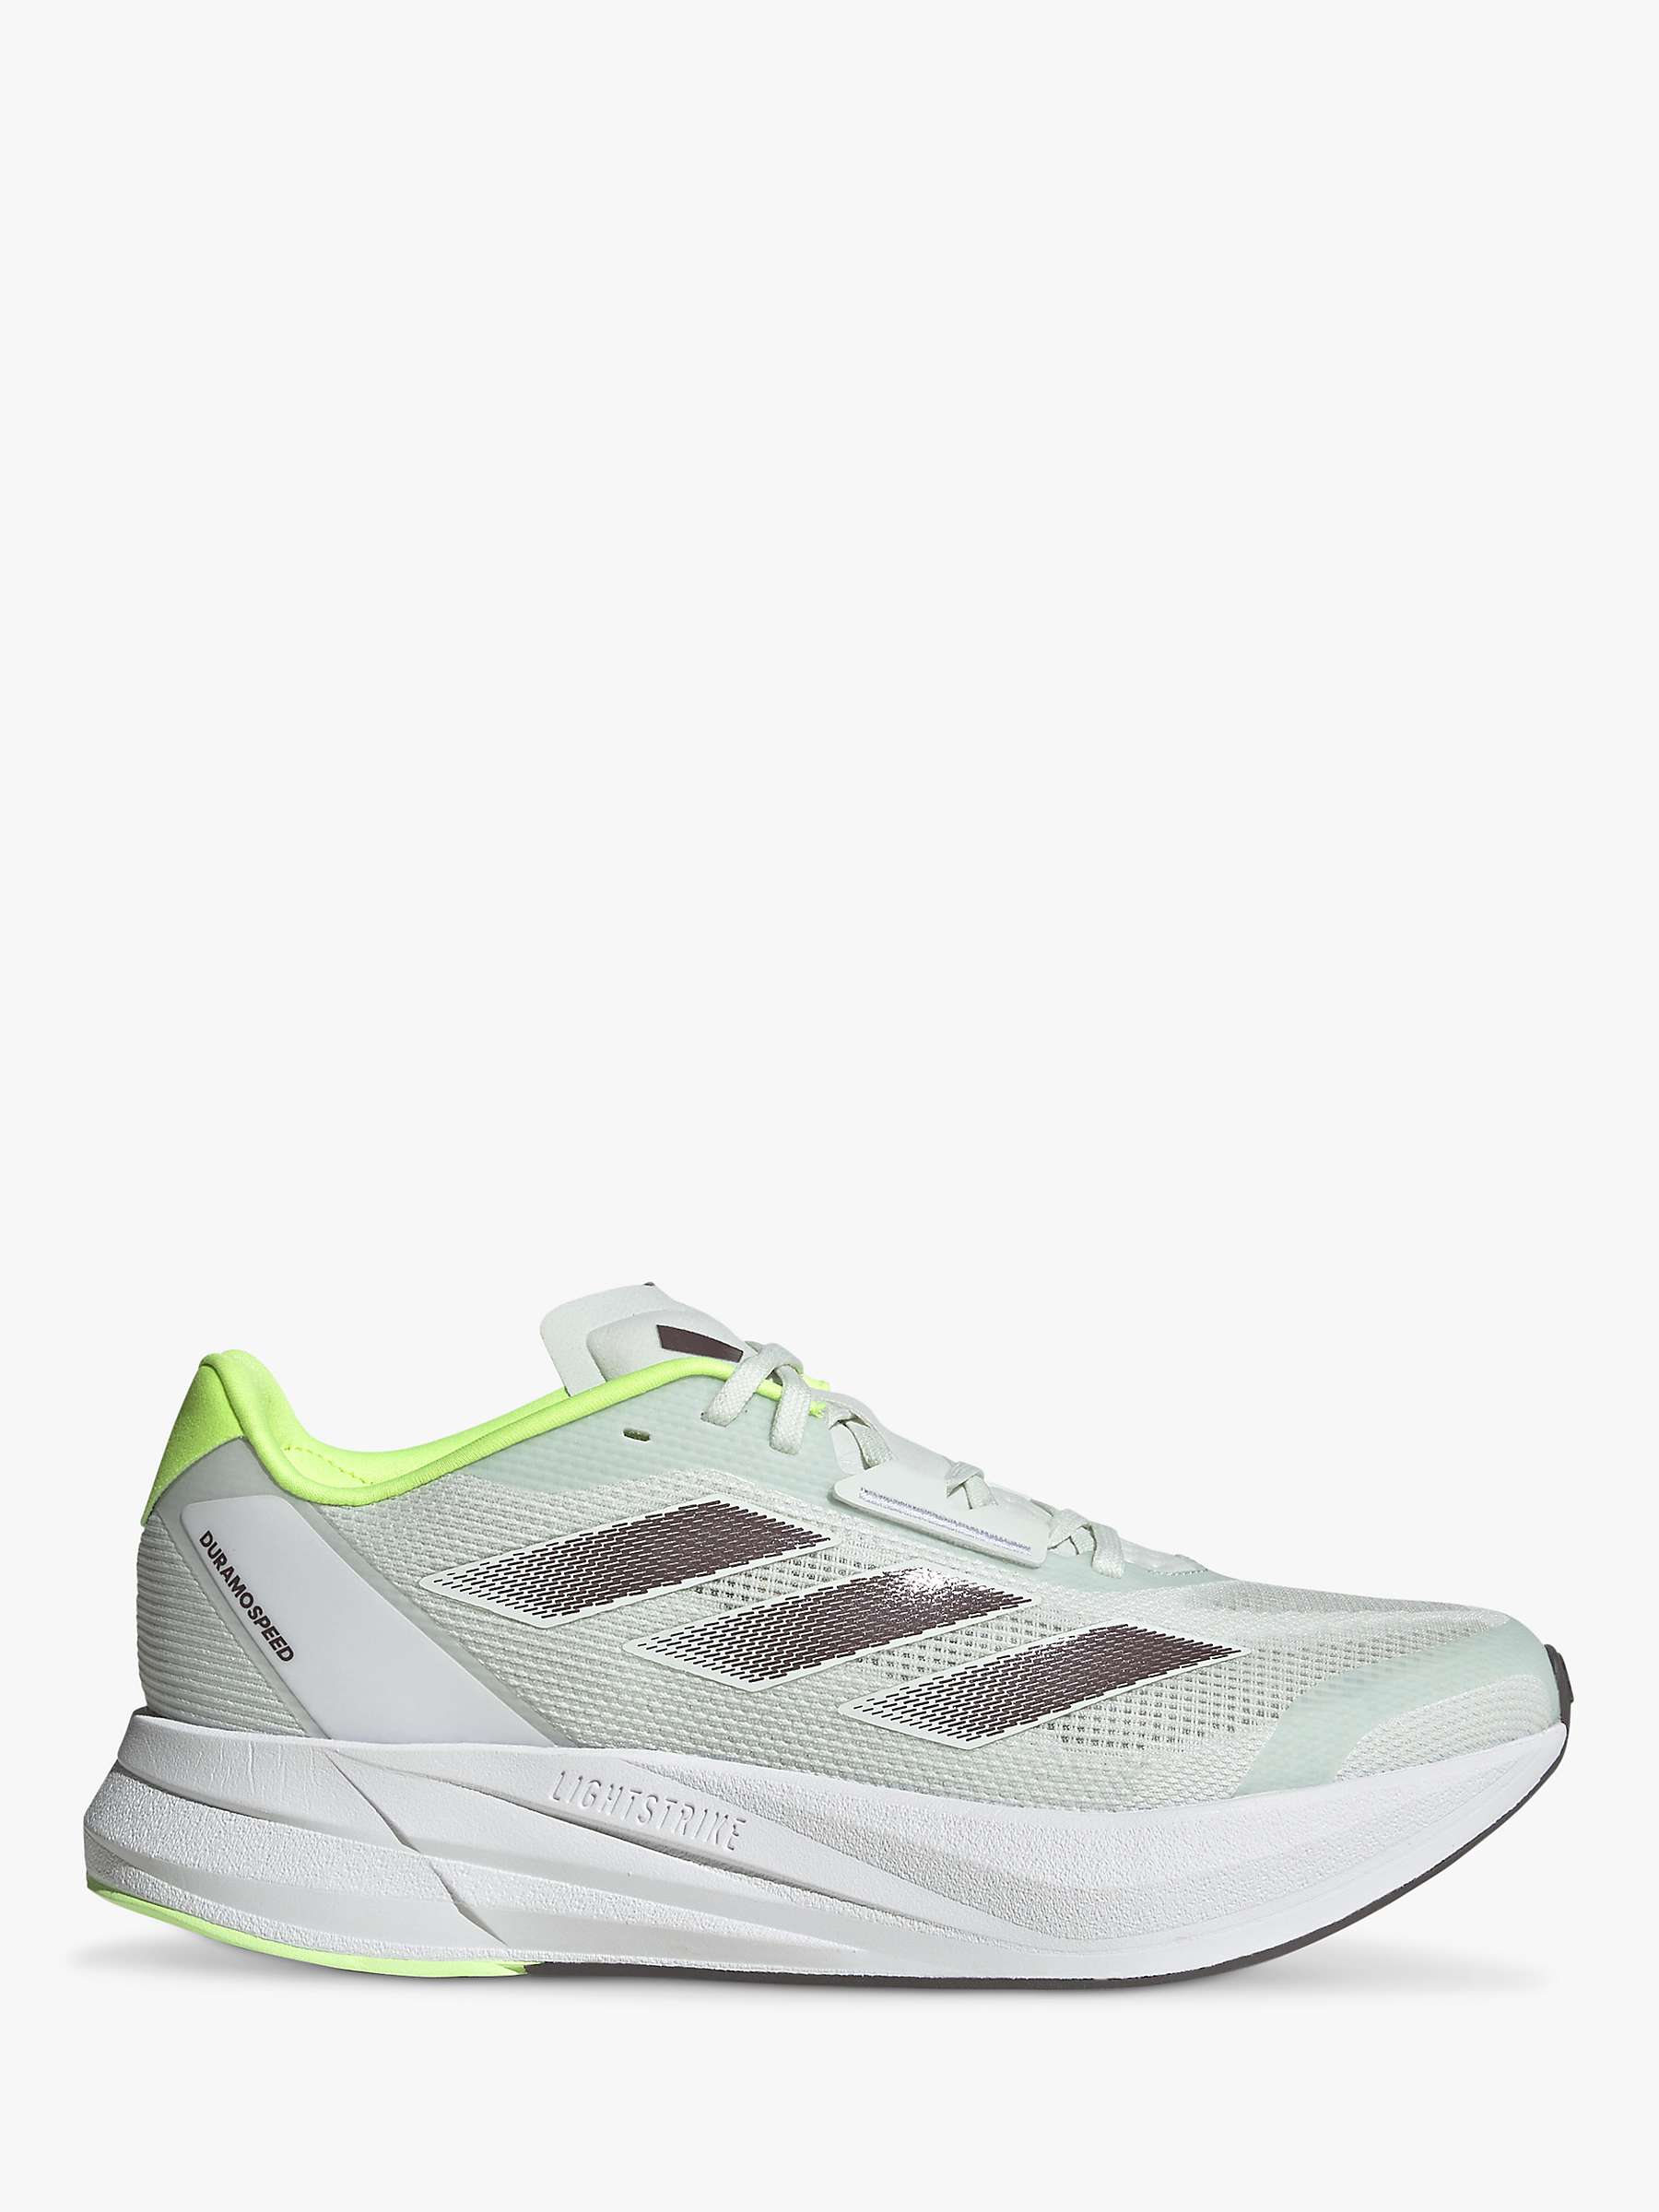 Buy adidas Duramo Speed Men's Sports Trainers, Jade/Charcoal Online at johnlewis.com